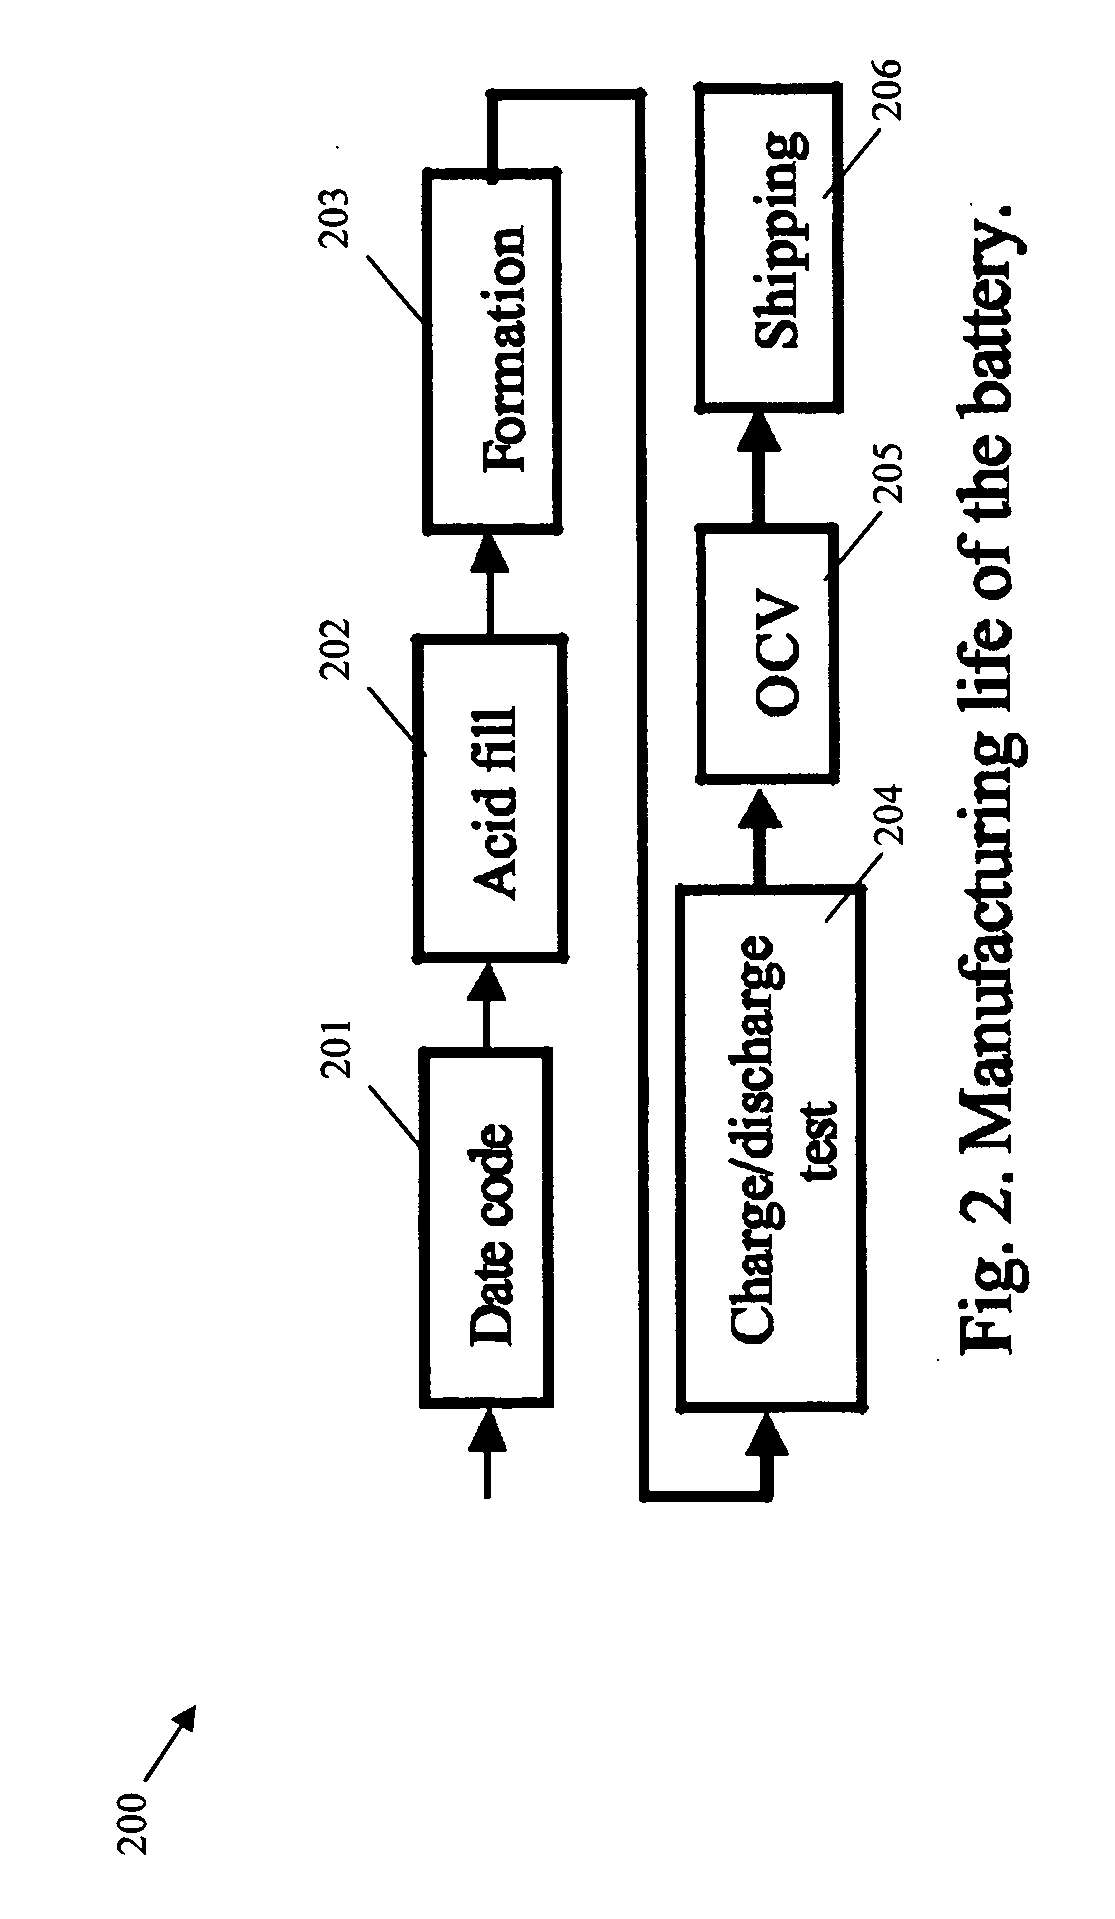 Method and apparatus for temperature, conductance and/or impedance testing in remote application of battery monitoring systems